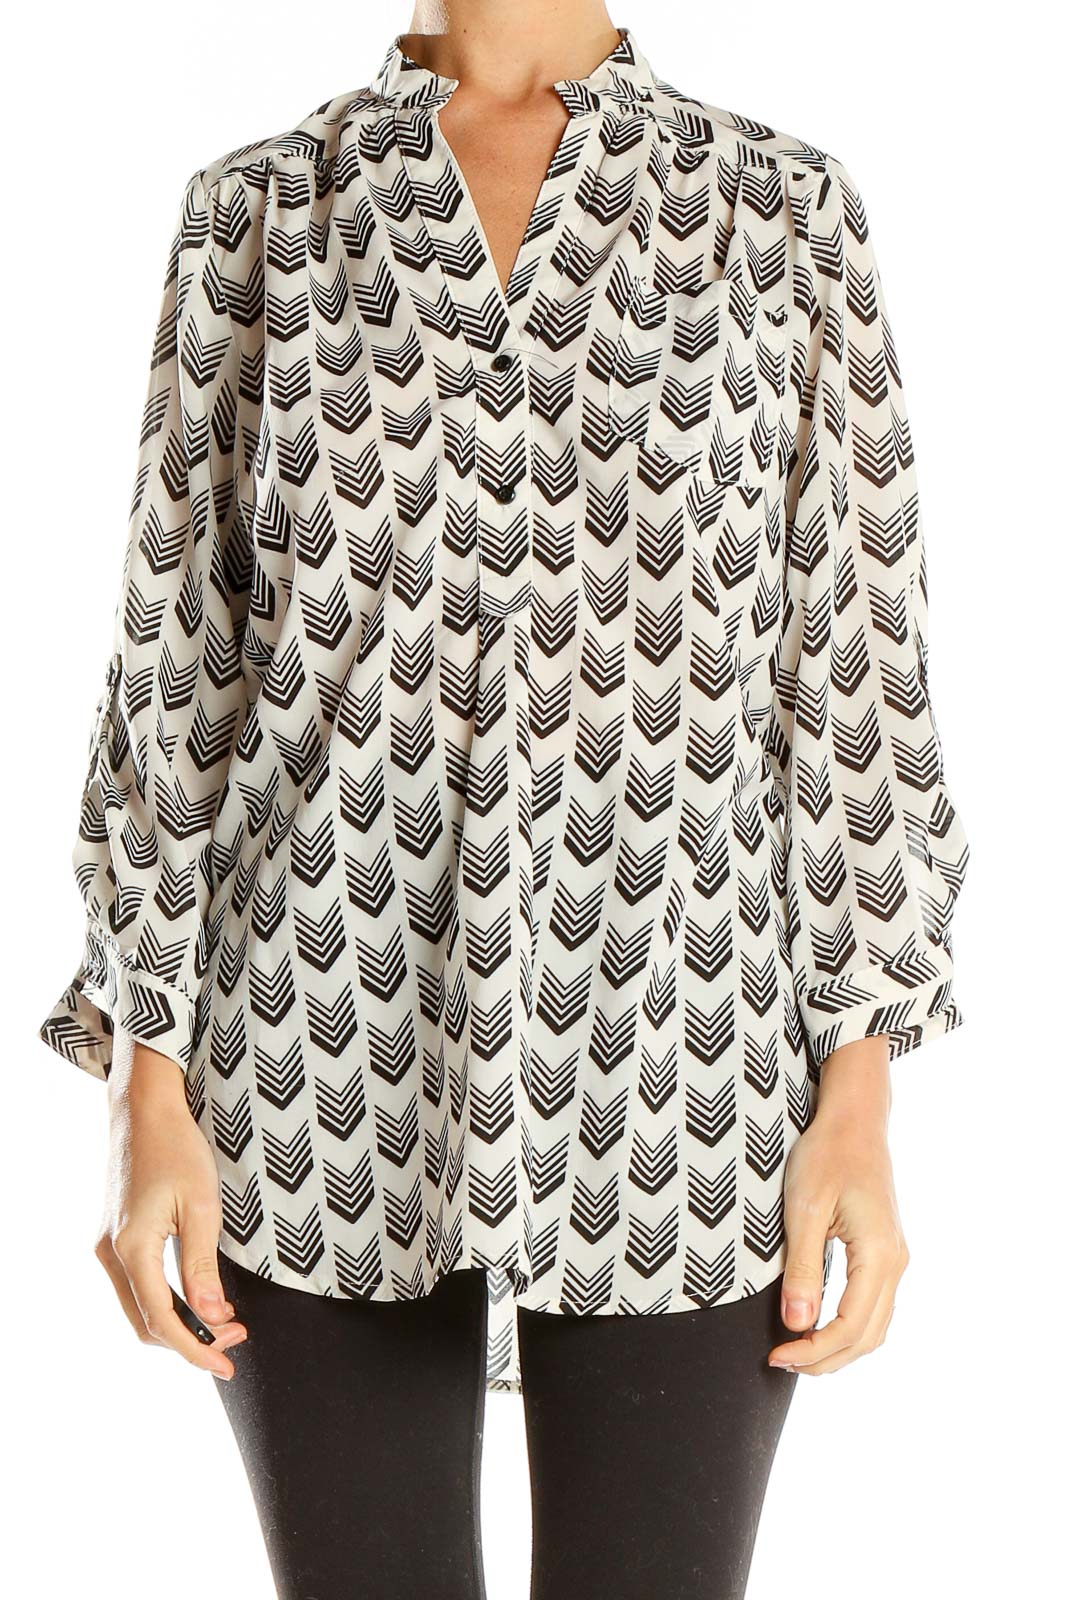 White Black Printed Blouse Front